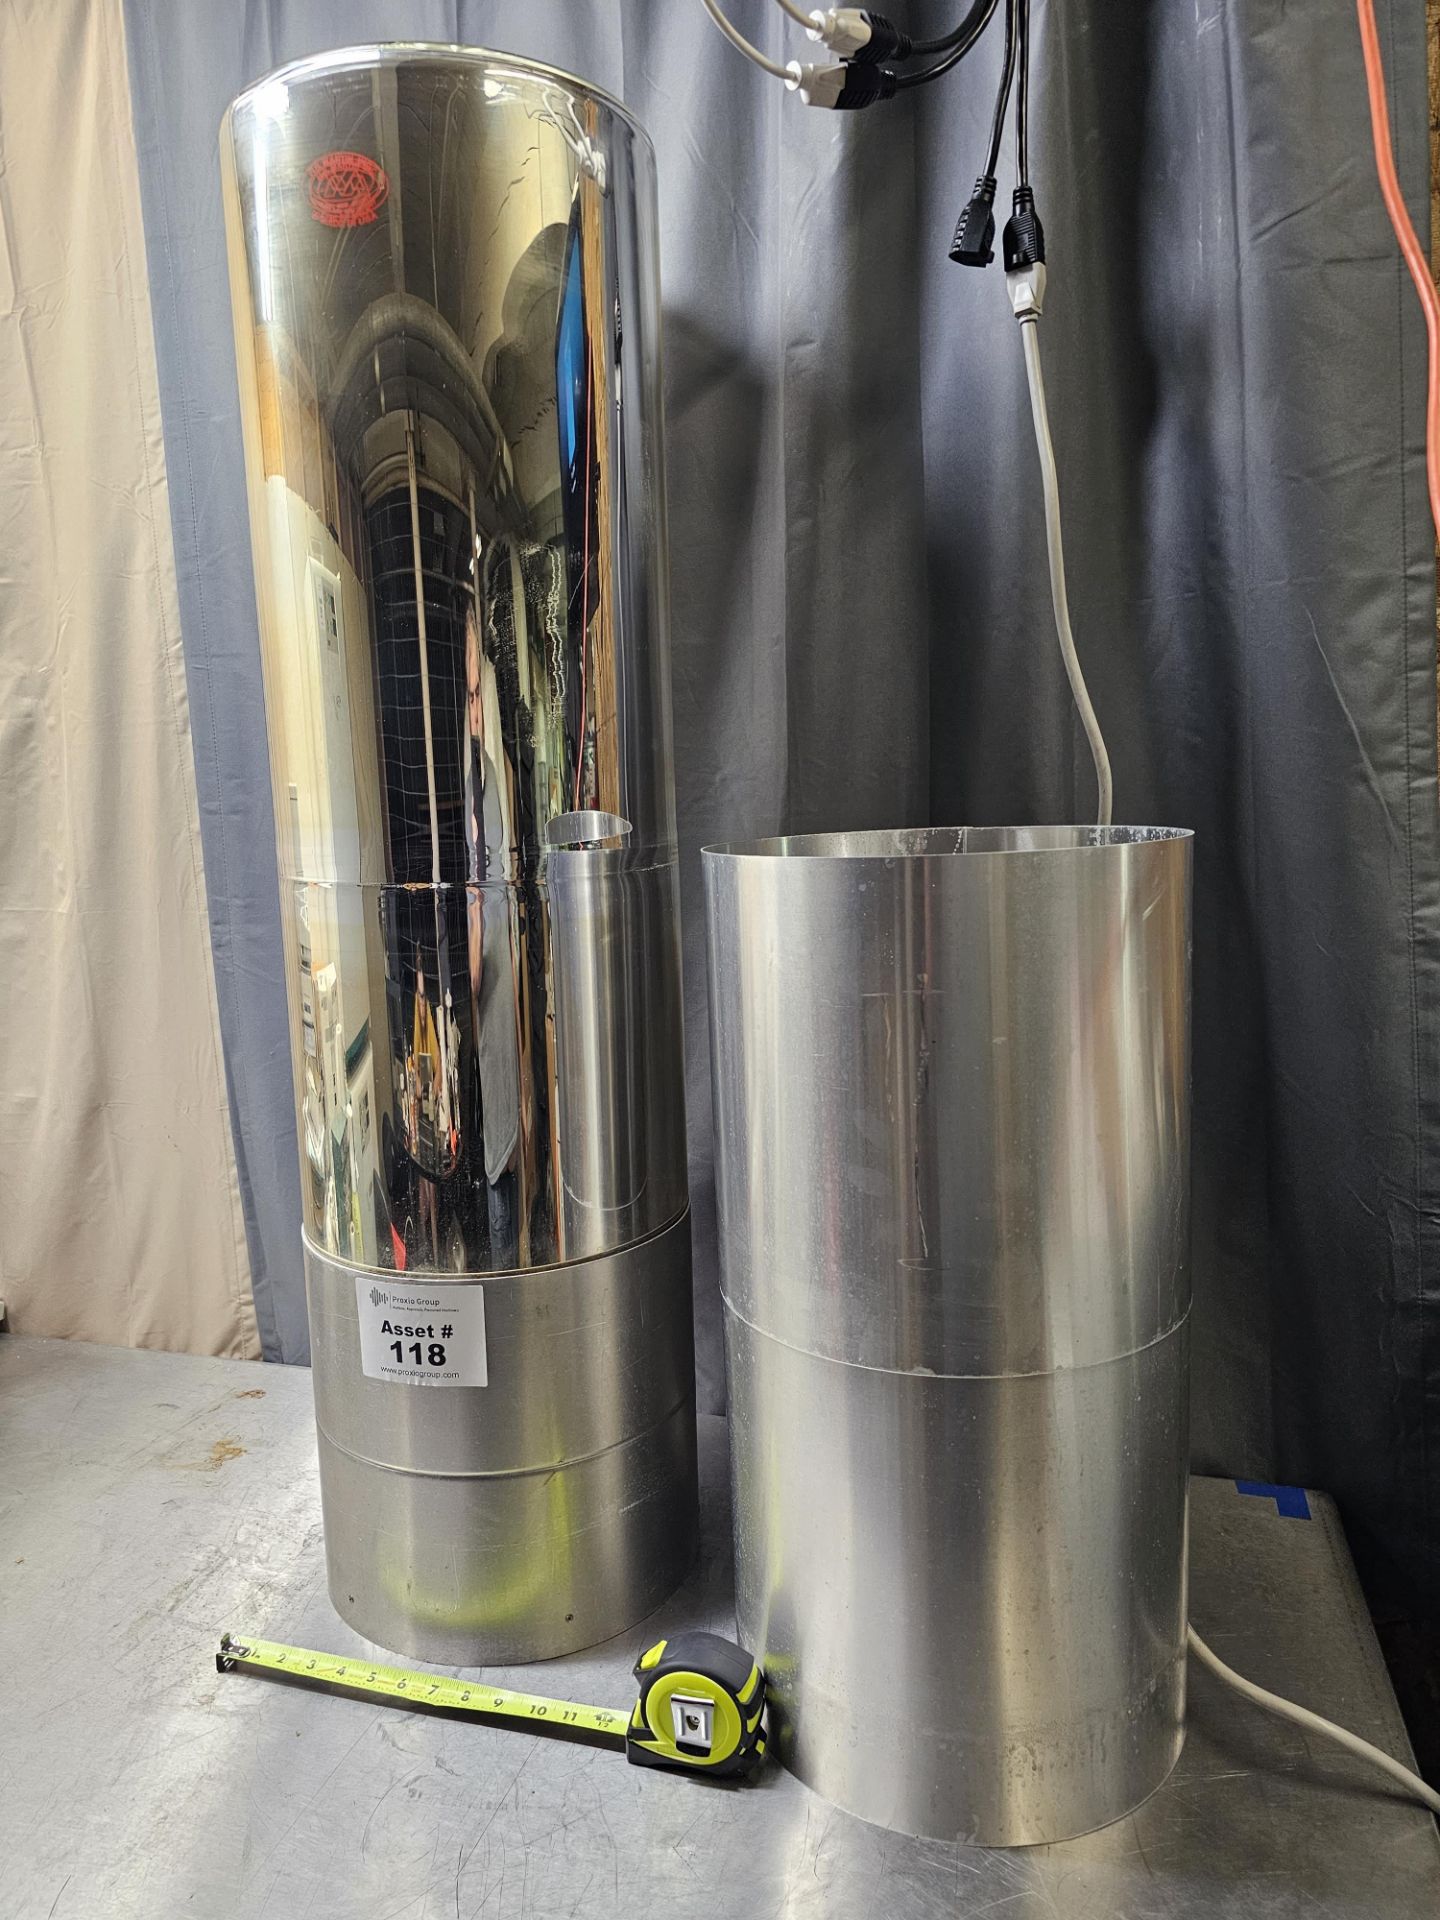 H.S.Martin 50L Silvered Glass Cryogenic Dewar Flask With Slide-on Protective Tubes Bldg Loc: Side - Image 4 of 5